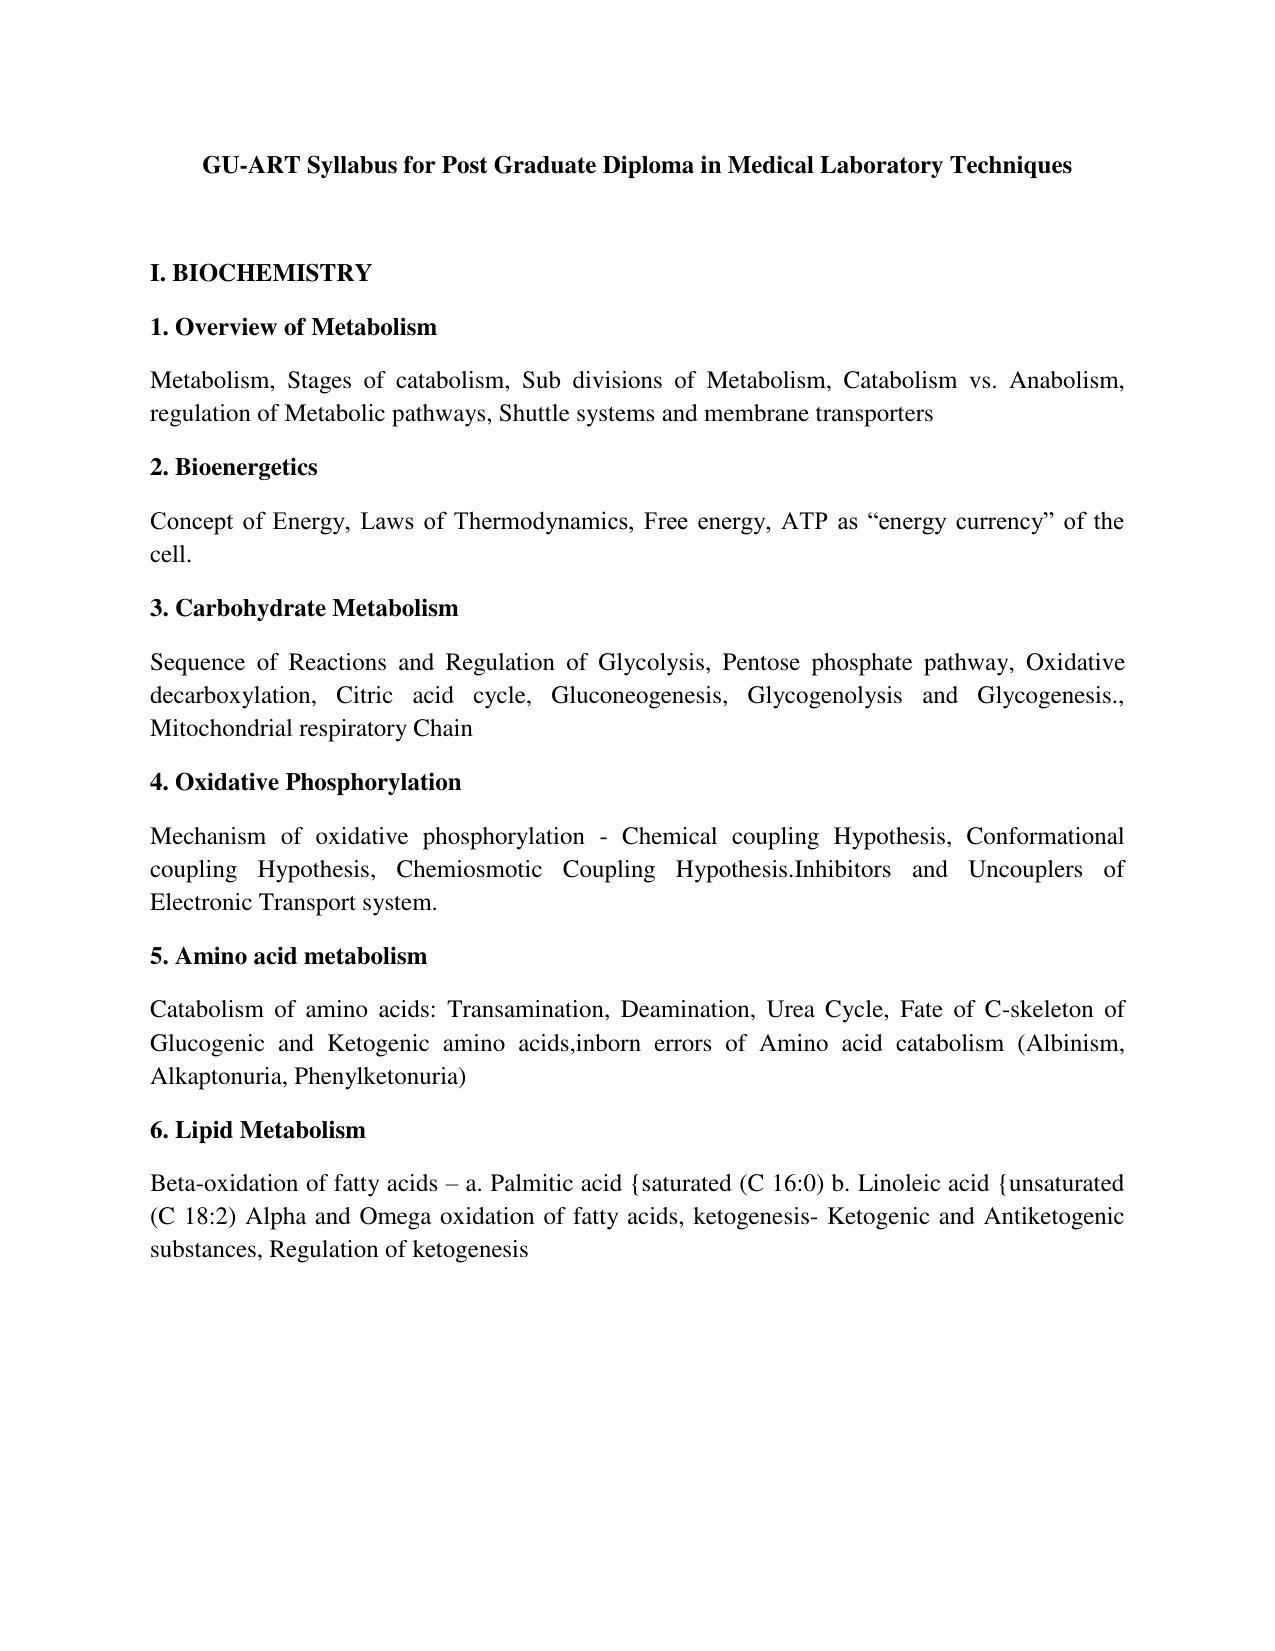 GU ART Post Graduate Diploma in Clinical Genetics and Medical Laboratory Techniques (PGDCG & MLT) Syllabus - Page 1